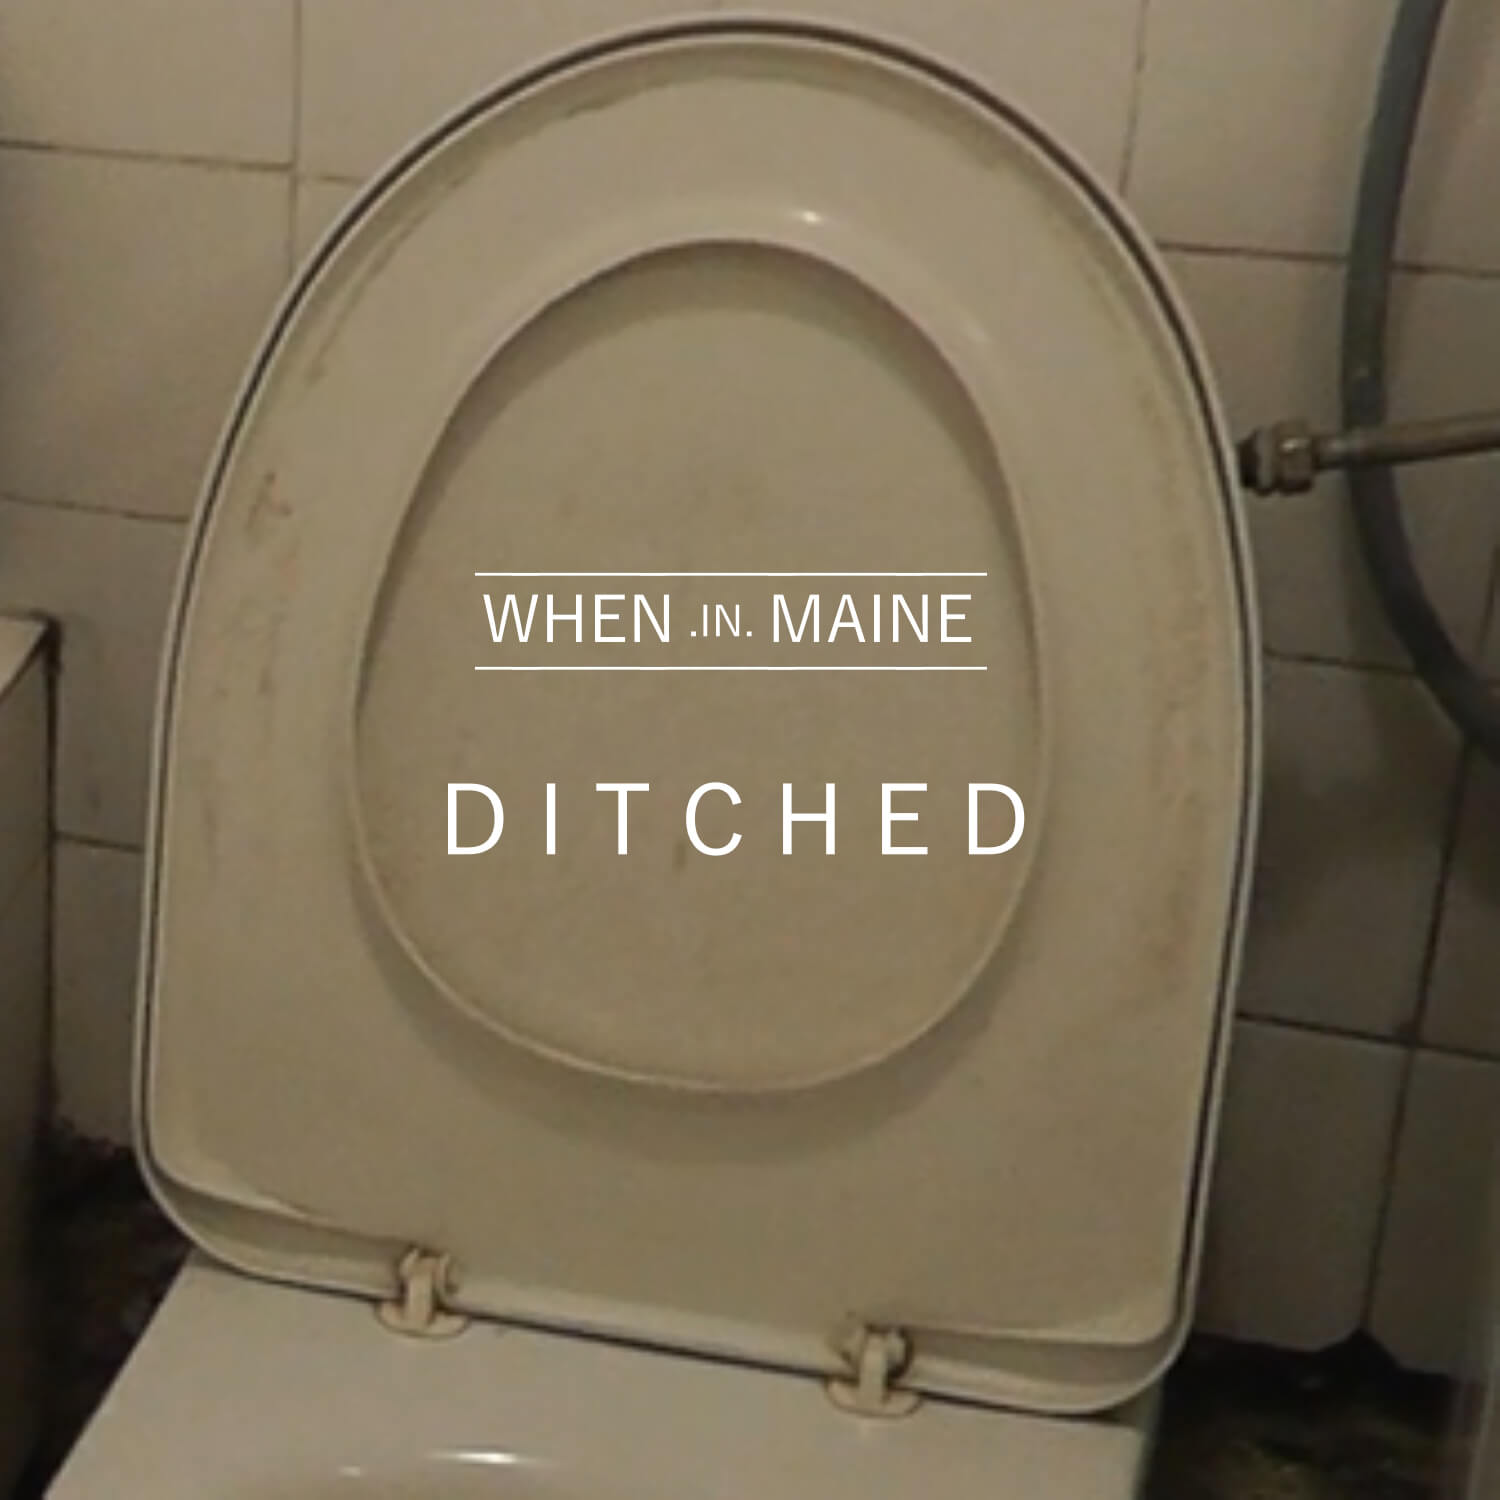 WHEN.in.MAINE “Ditched”